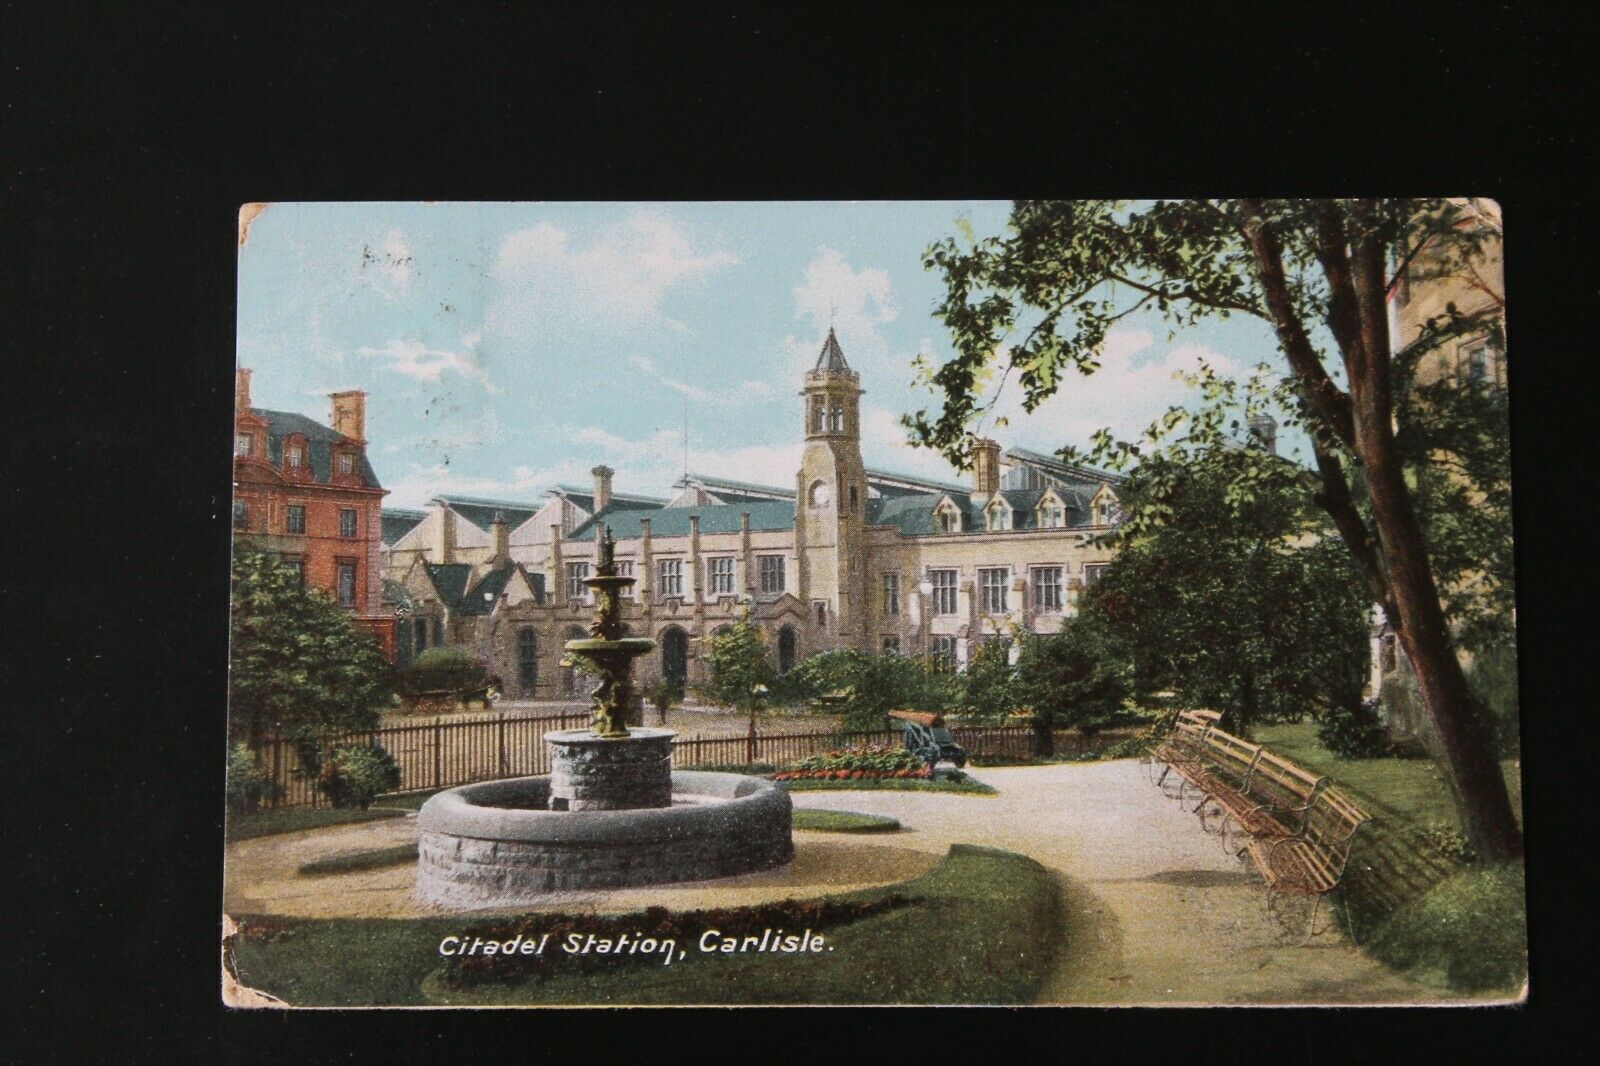 House Clearance - Brown & Rawcliffe - Citadel Station, Carlisle - posted 1906